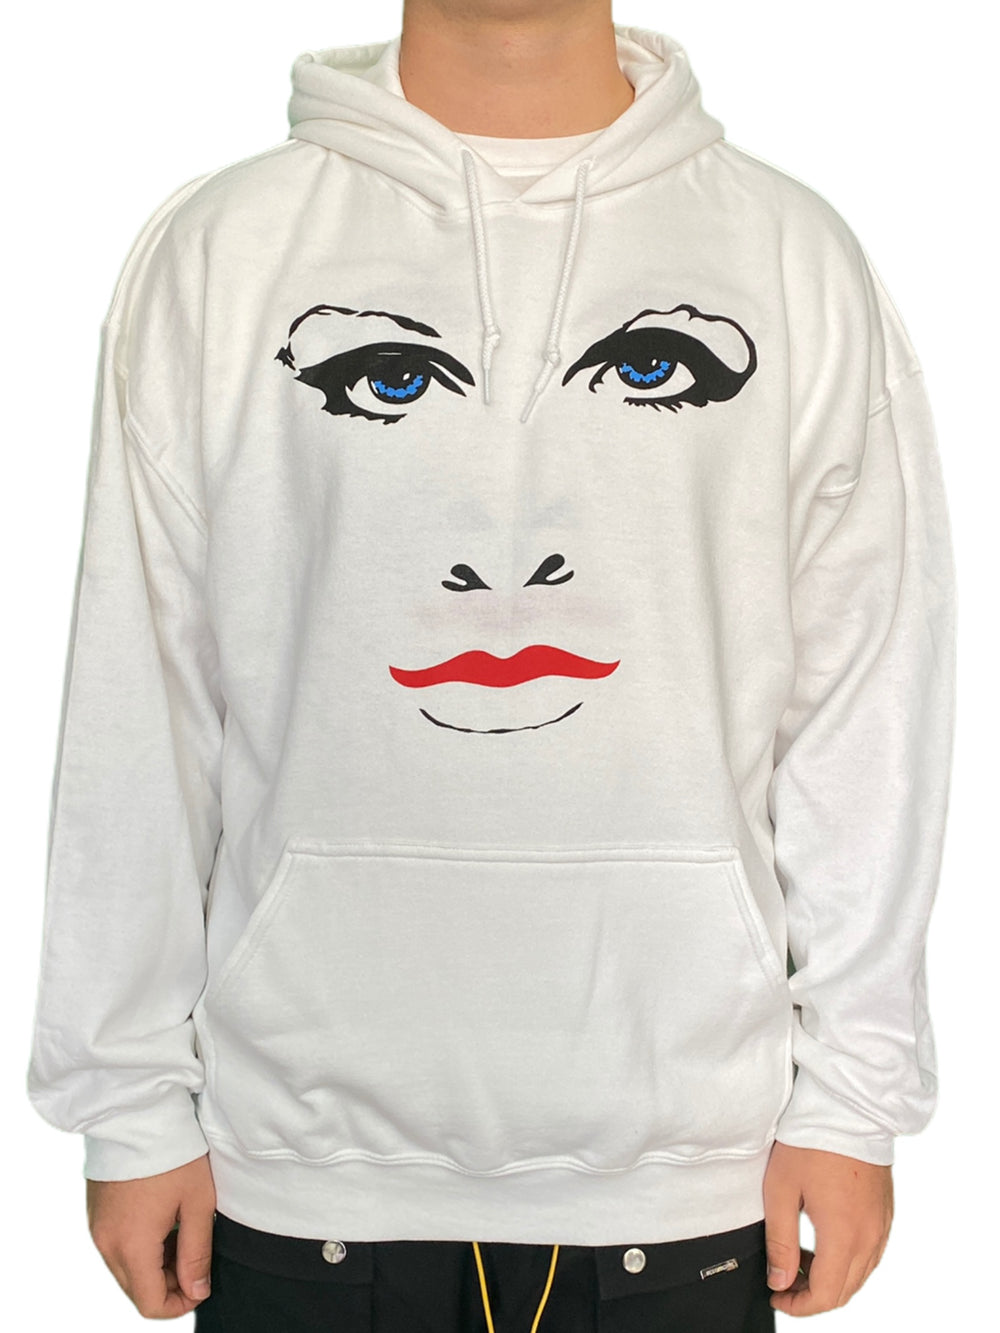 Prince – & The Revolution Official Unisex Hoodie When Doves Cry NEW